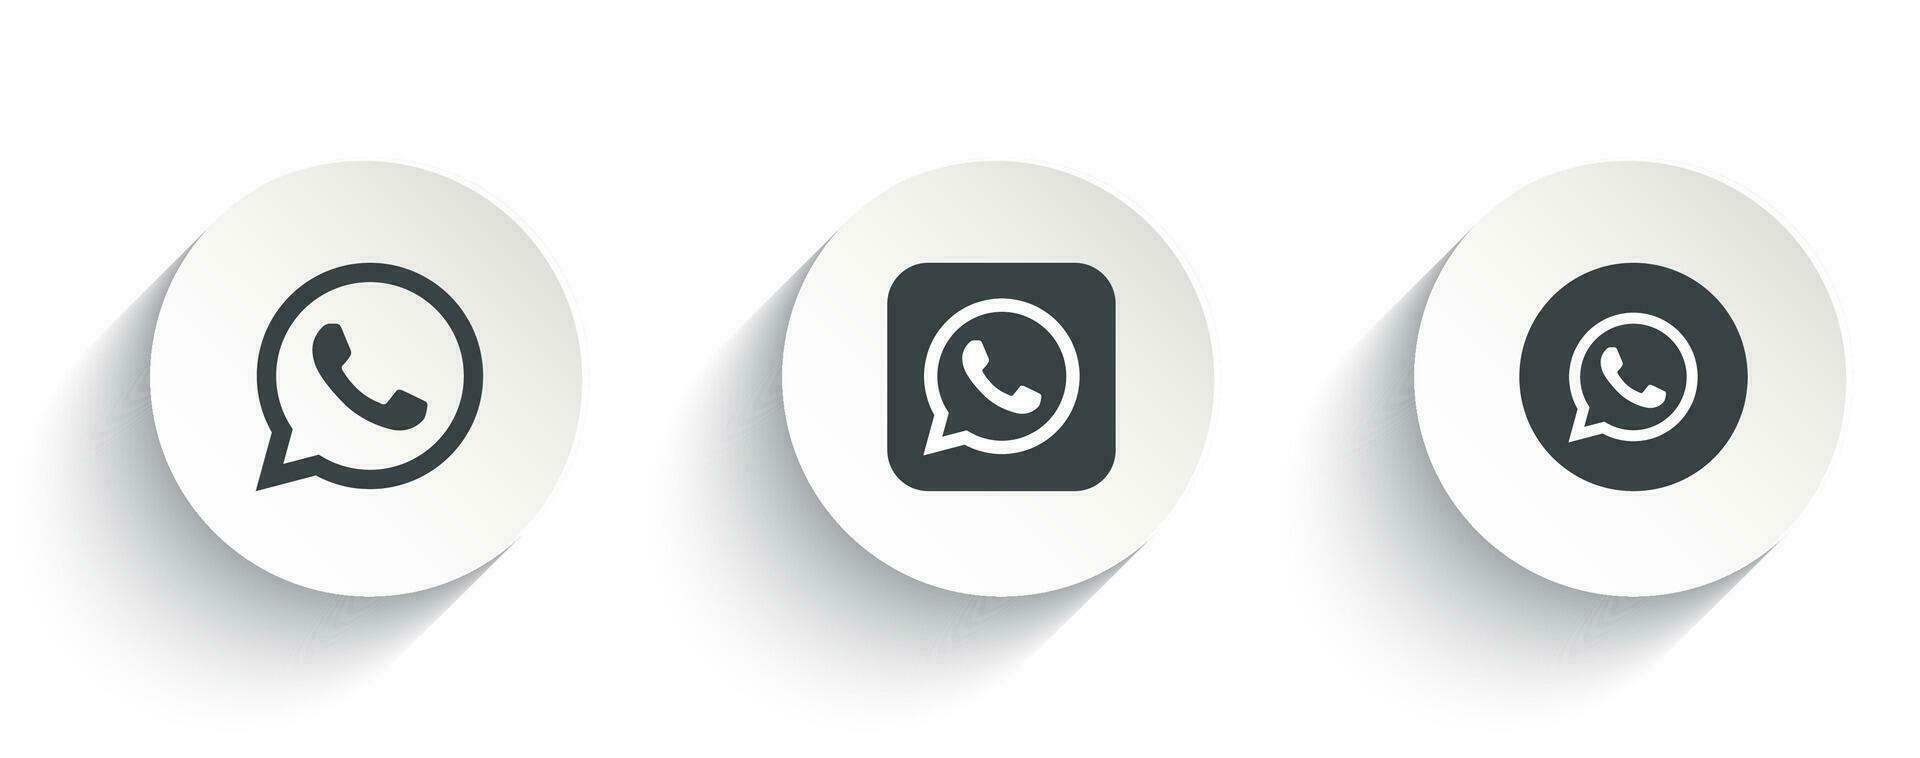 Set of Whatsapp vector icon with flat round button isolated on white background.